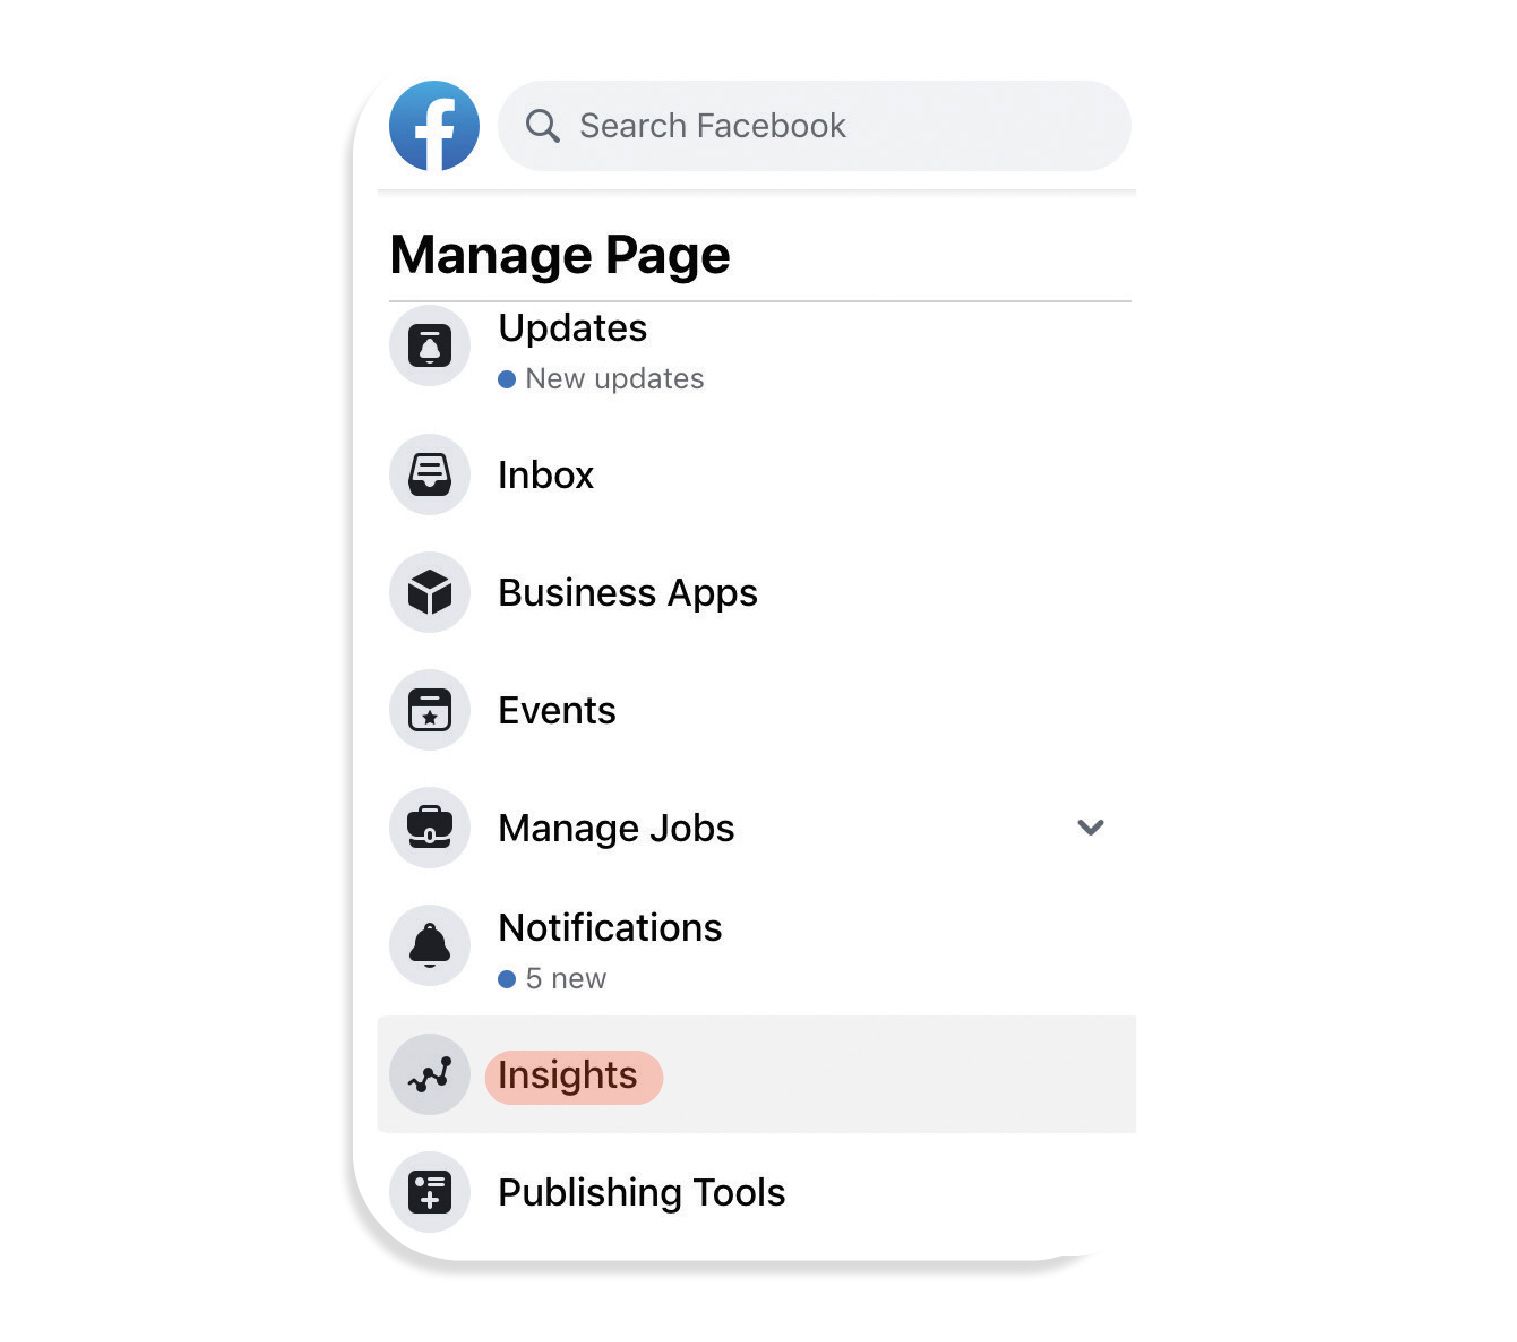 Image: A screenshot showing where to find the Insights menu on a Facebook page, which is in the Manage Page column, between Notifications and Publishing Tools.